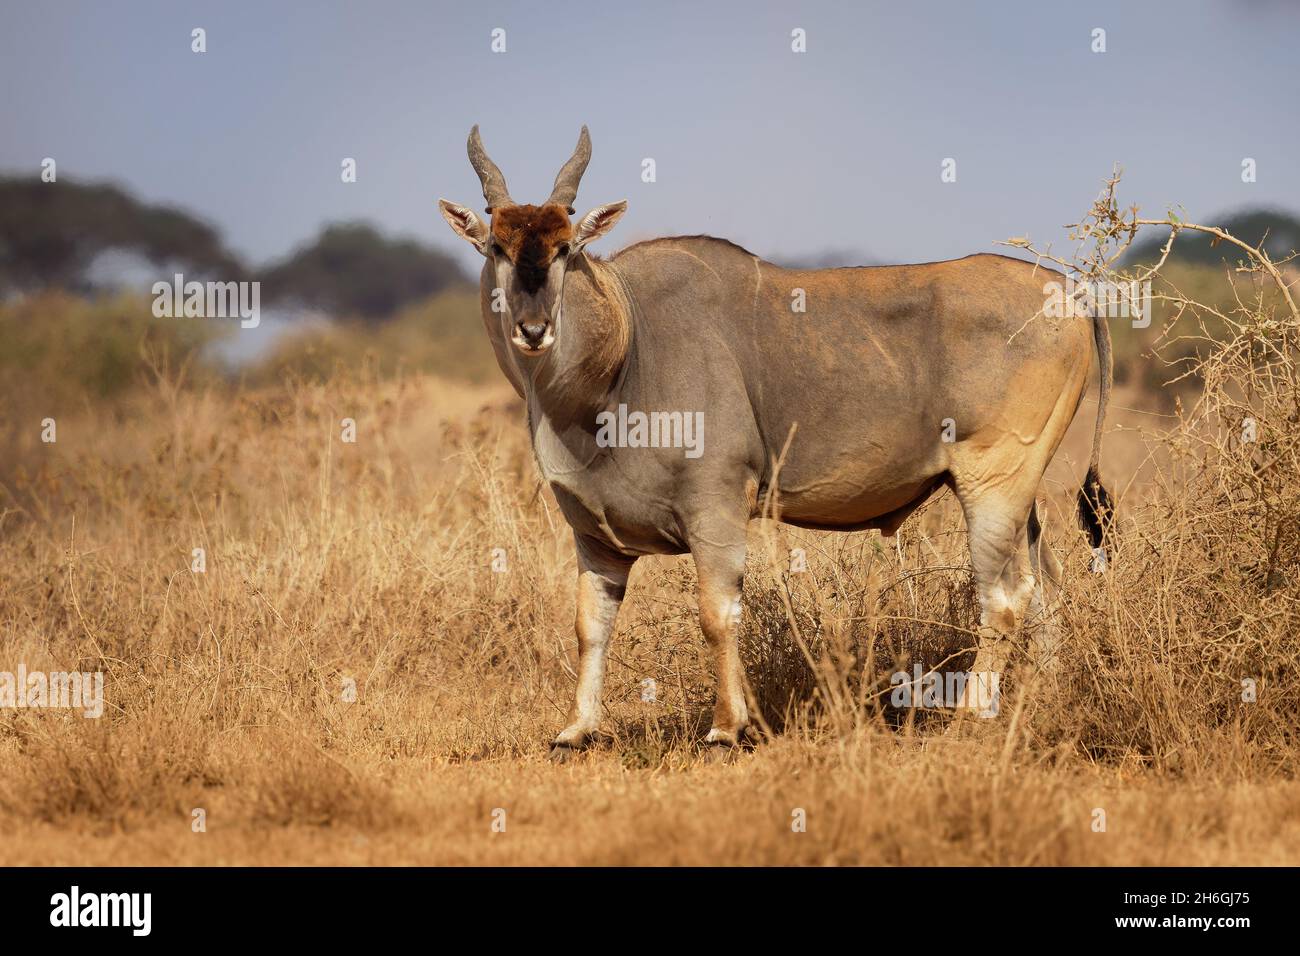 Common Eland - Taurotragus oryx also the southern eland or eland antelope, savannah and plains antelope found in East and Southern Africa, family Bovi Stock Photo